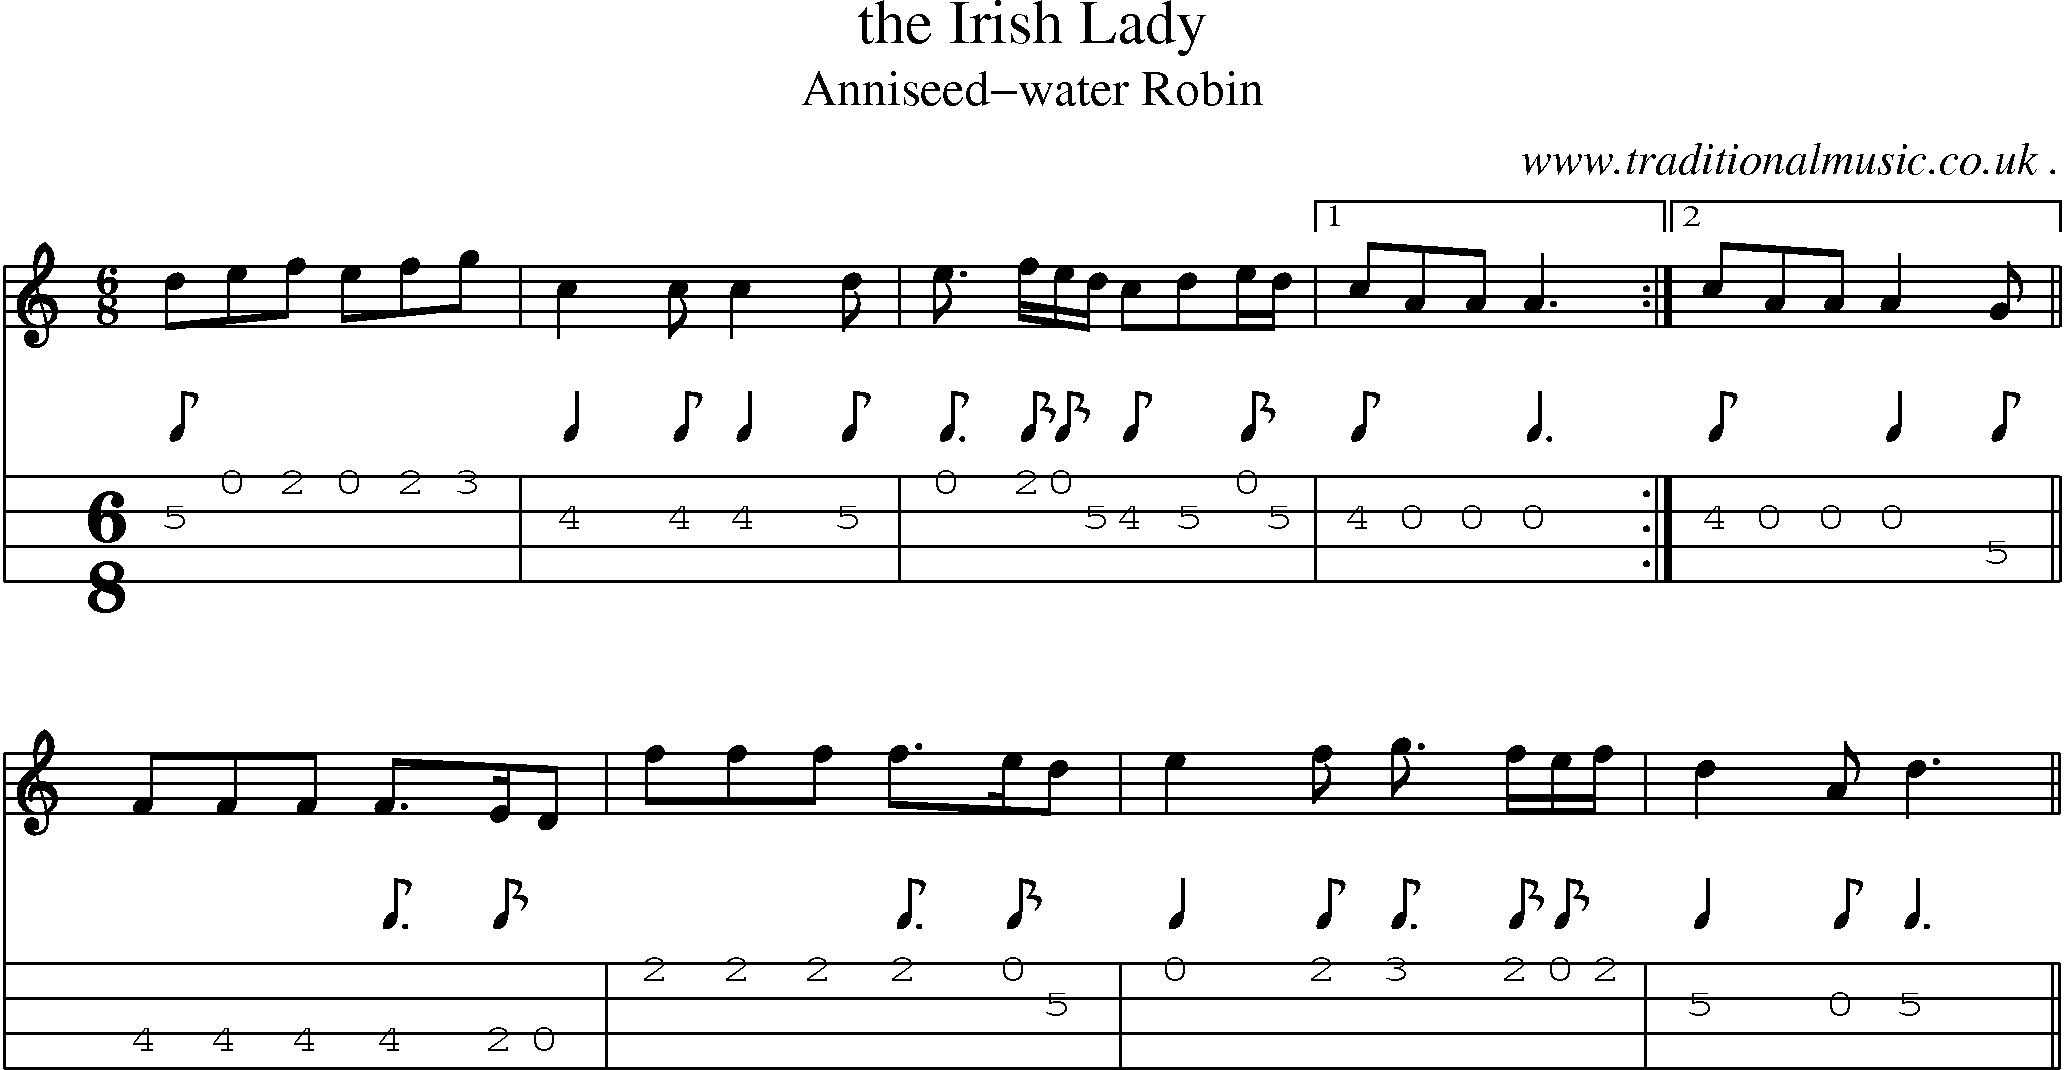 Sheet-music  score, Chords and Mandolin Tabs for The Irish Lady